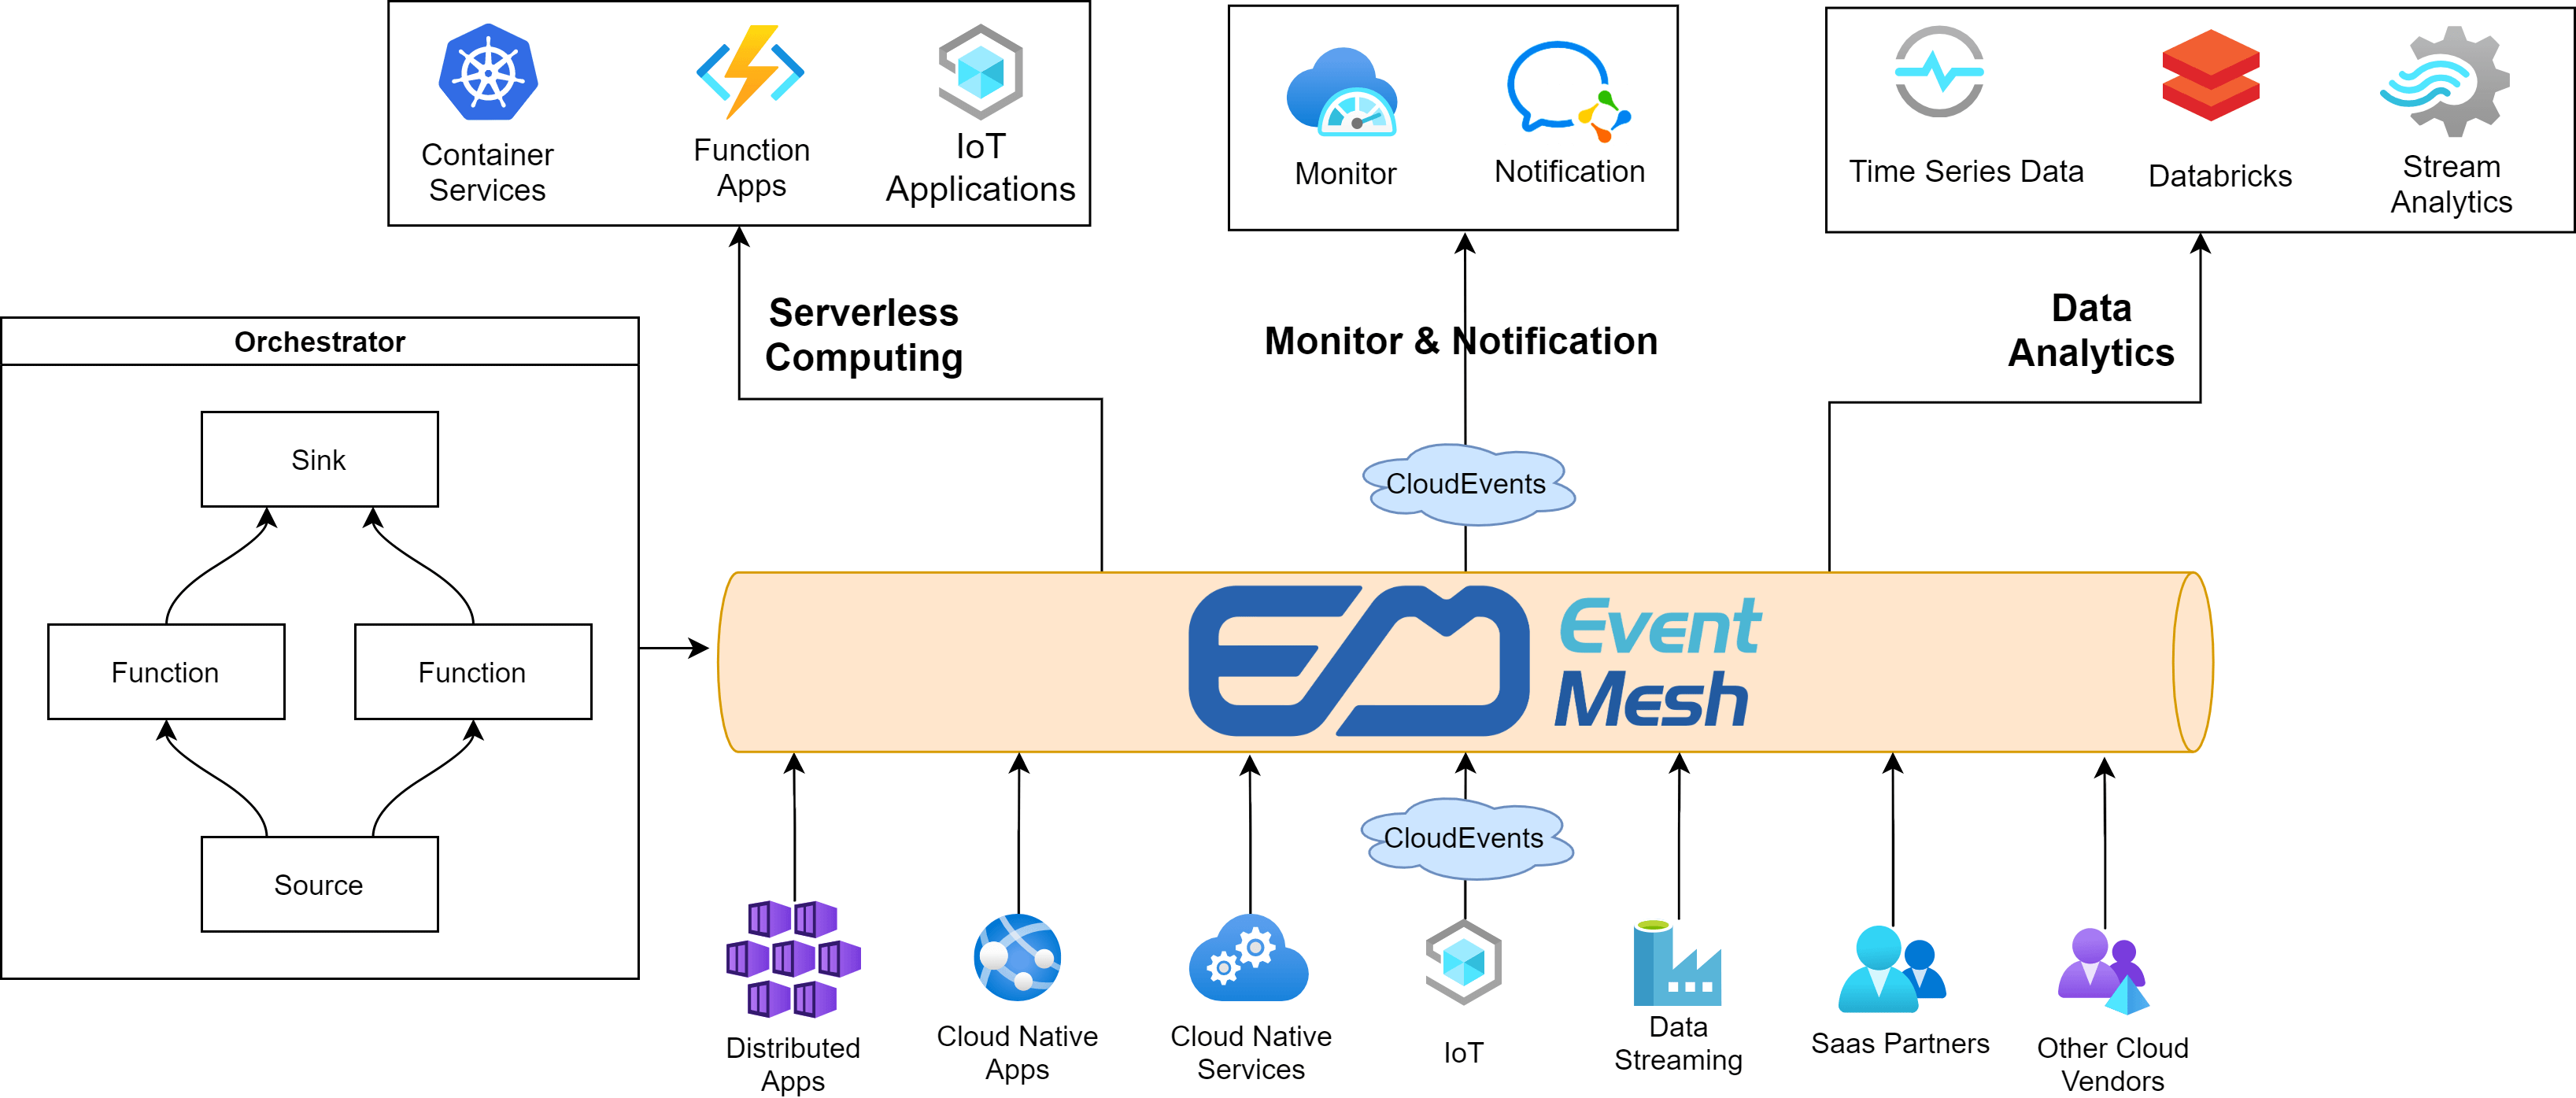 EventMesh Orchestration